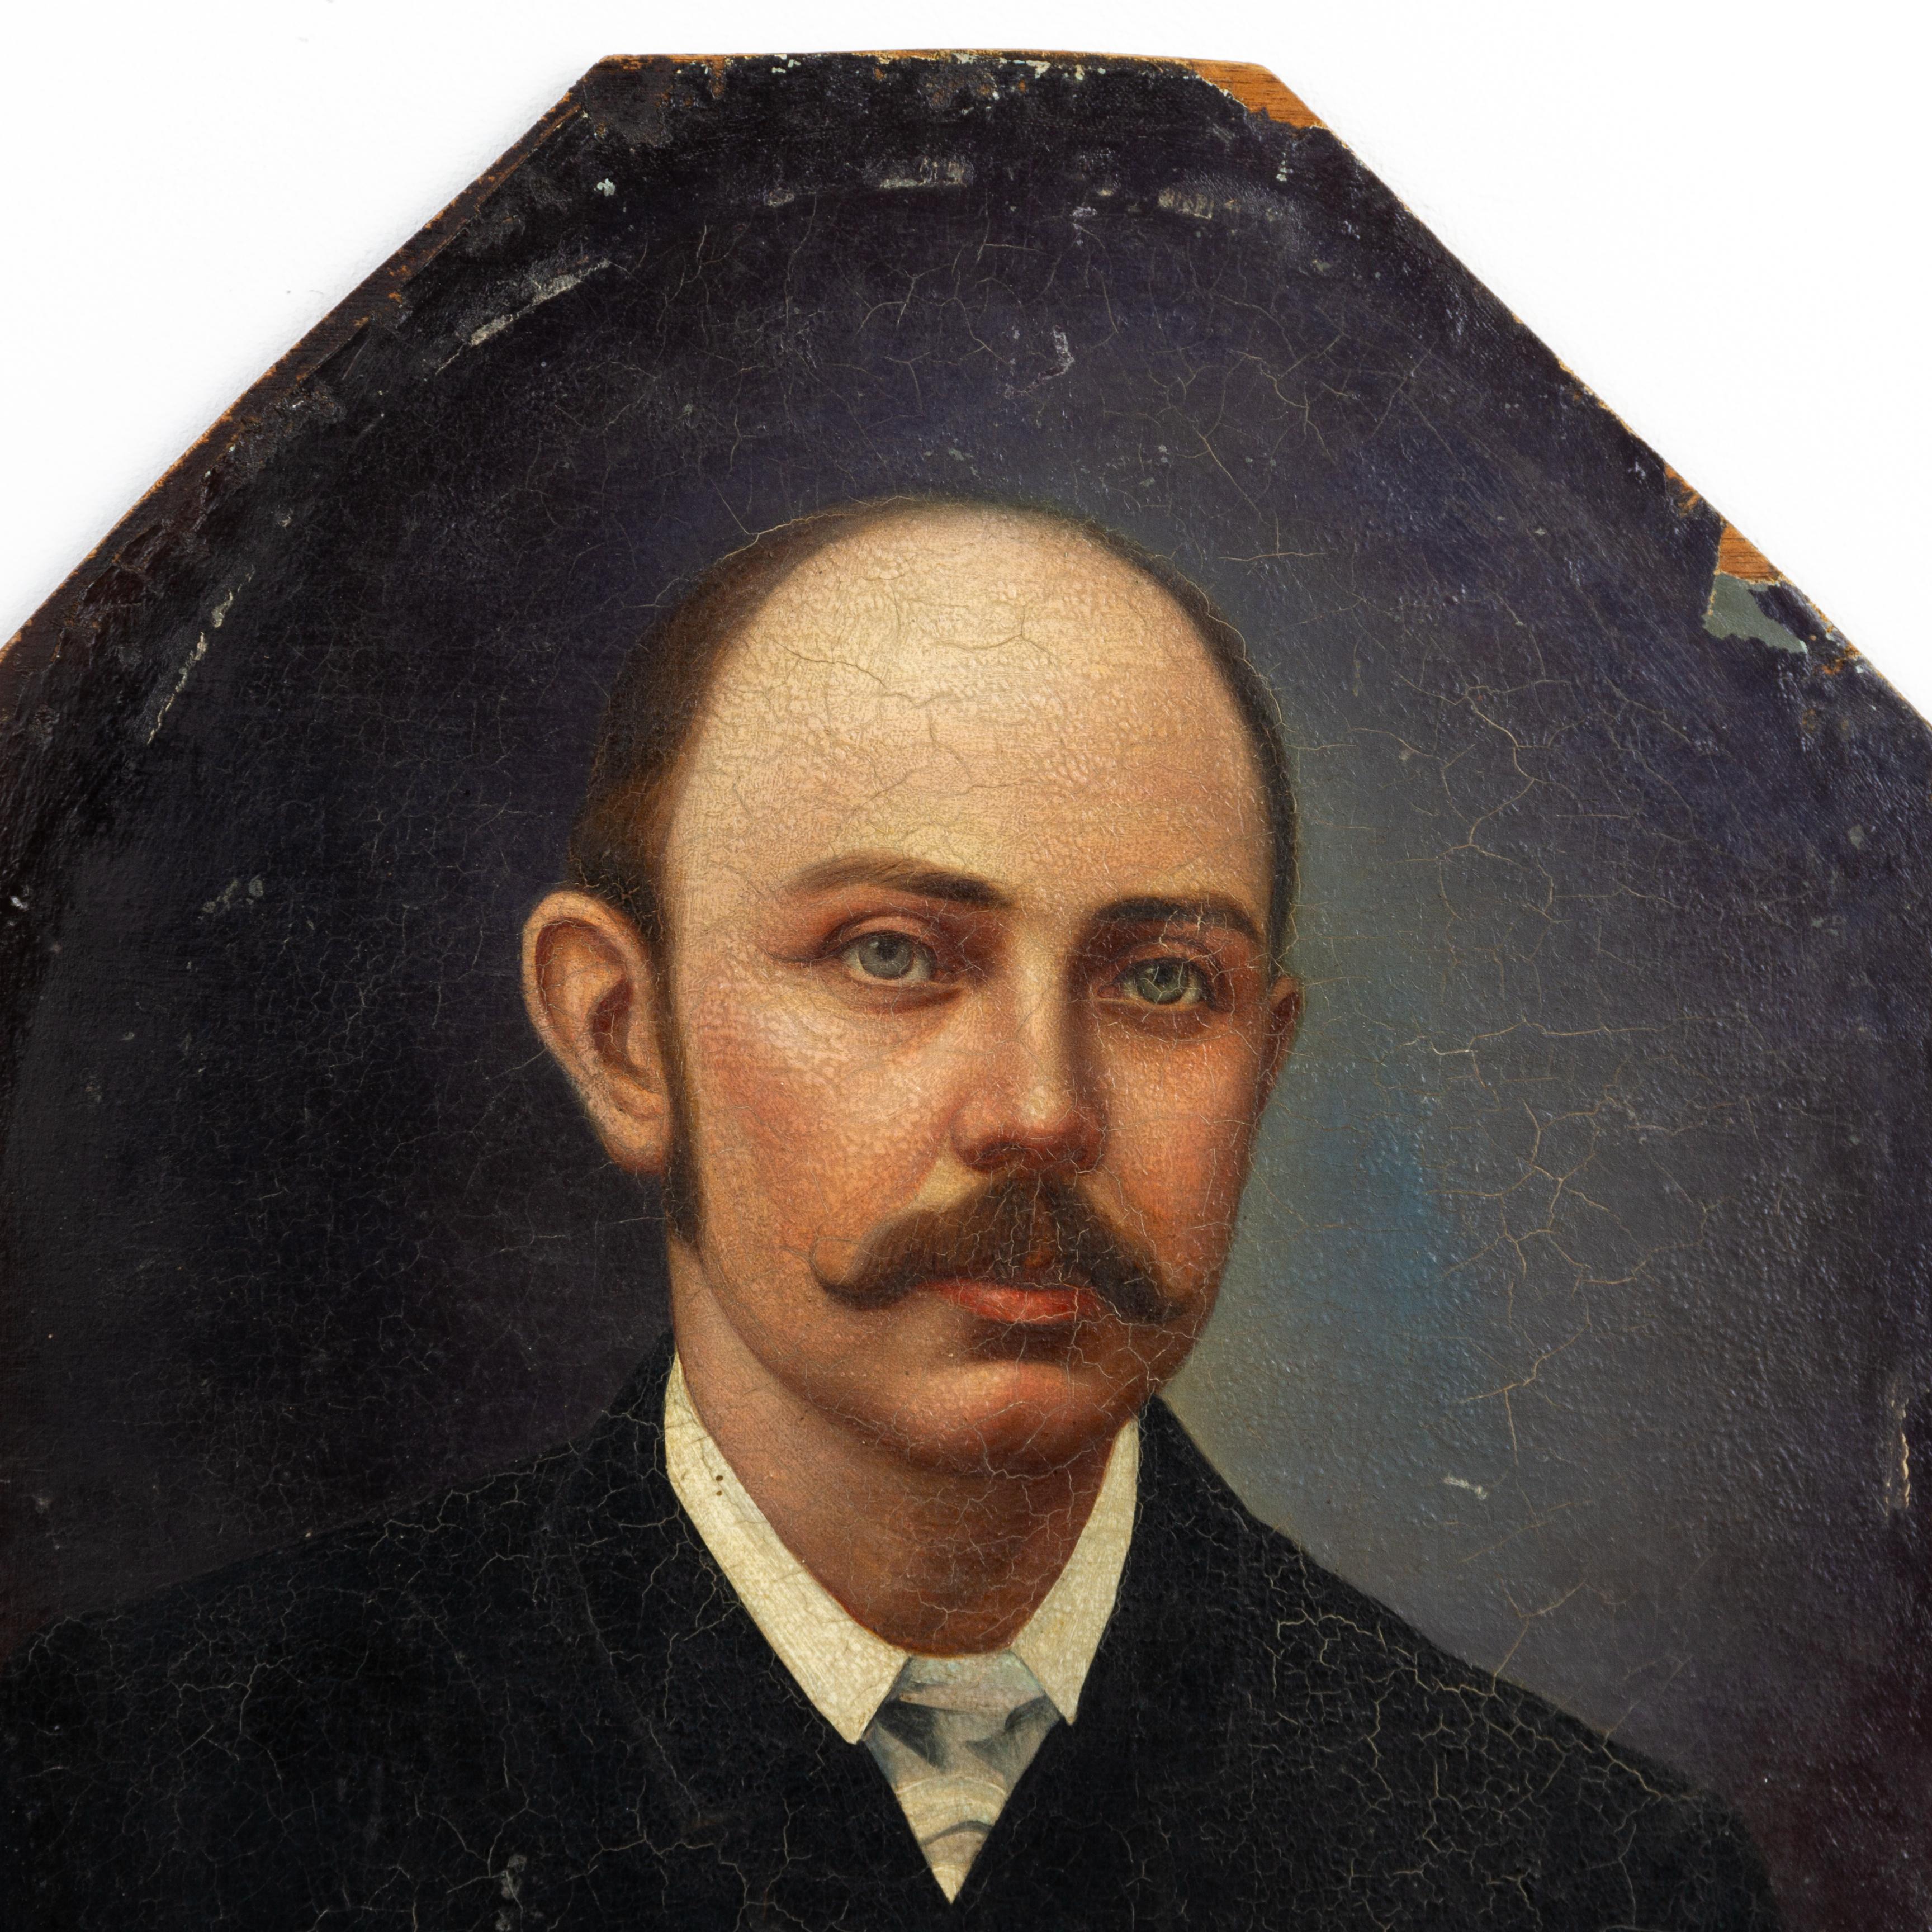 Portrait Oil Painting of a Gentleman Early 20th Century
Condition as seen, signs of wear around the edges where previously framed.
From a private collection.


Free international shipping.